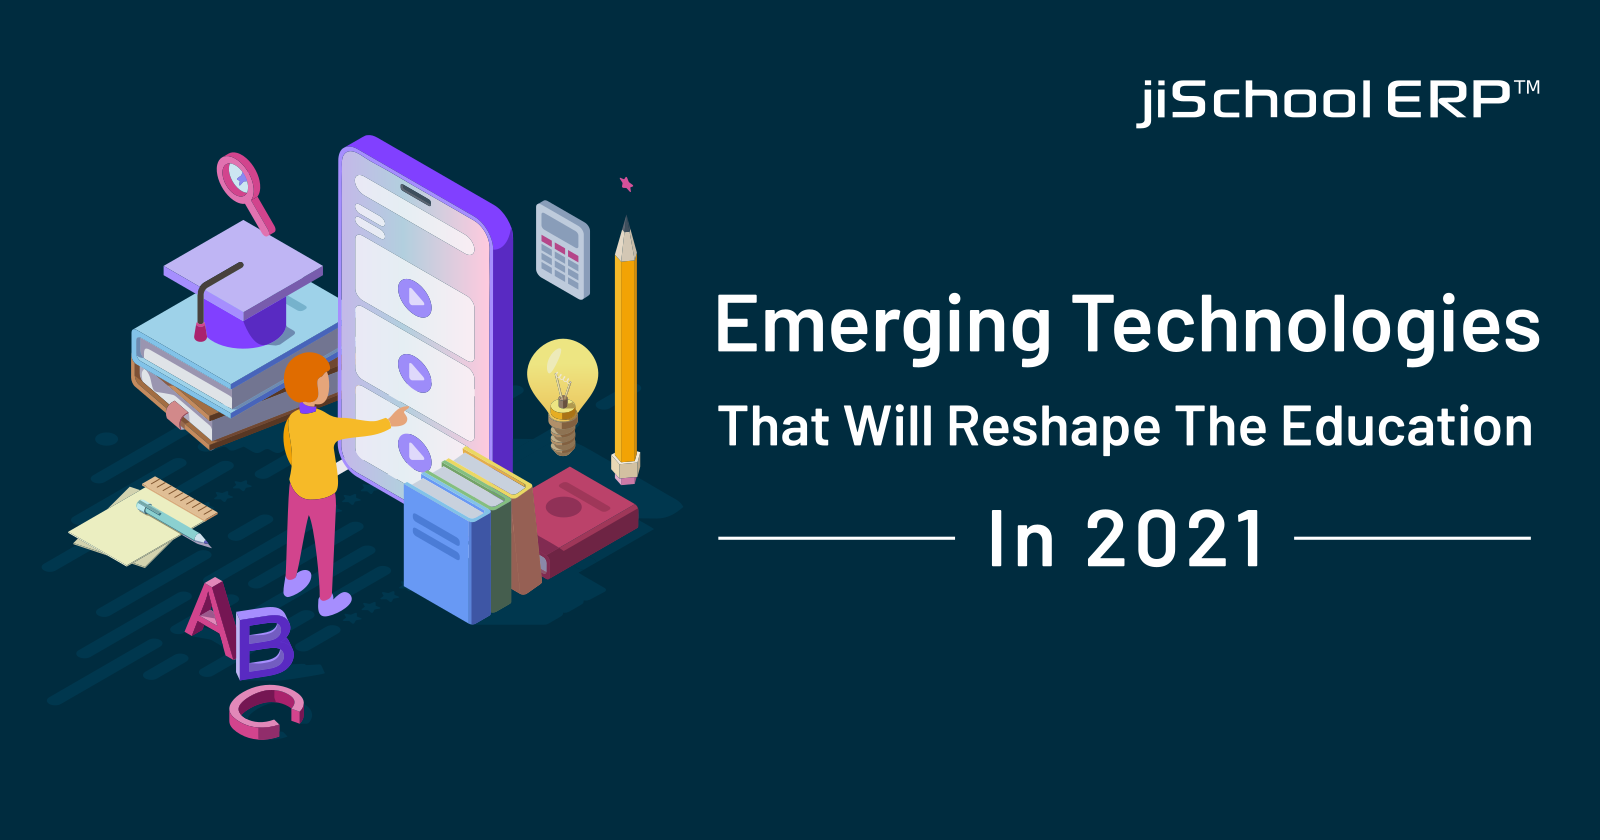 Emerging Technologies that will Reshape the Education in 2021